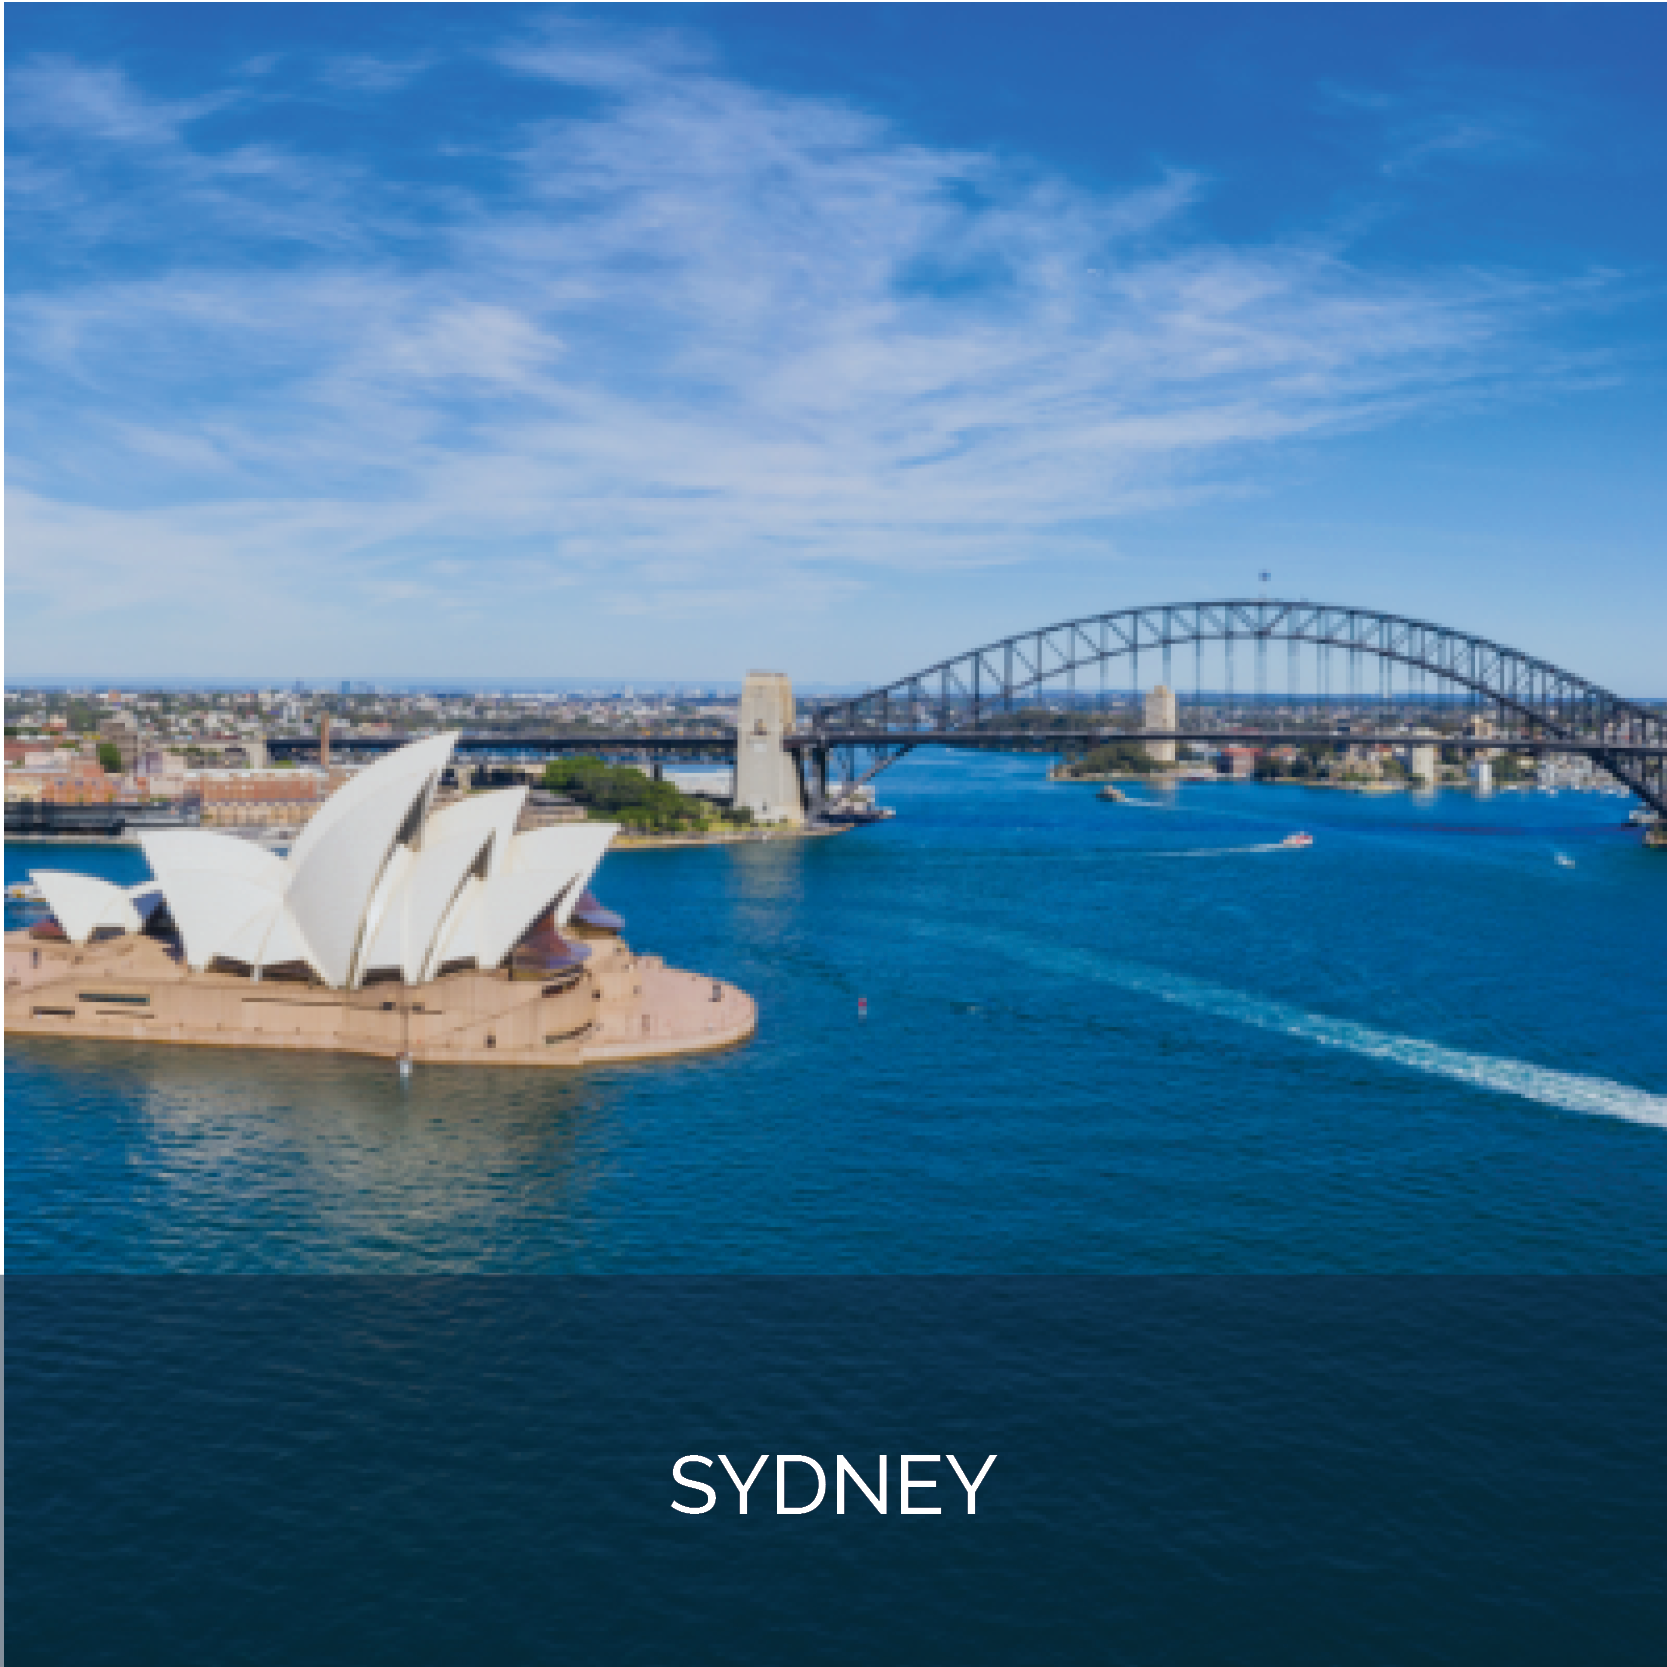 We are located in Sydney